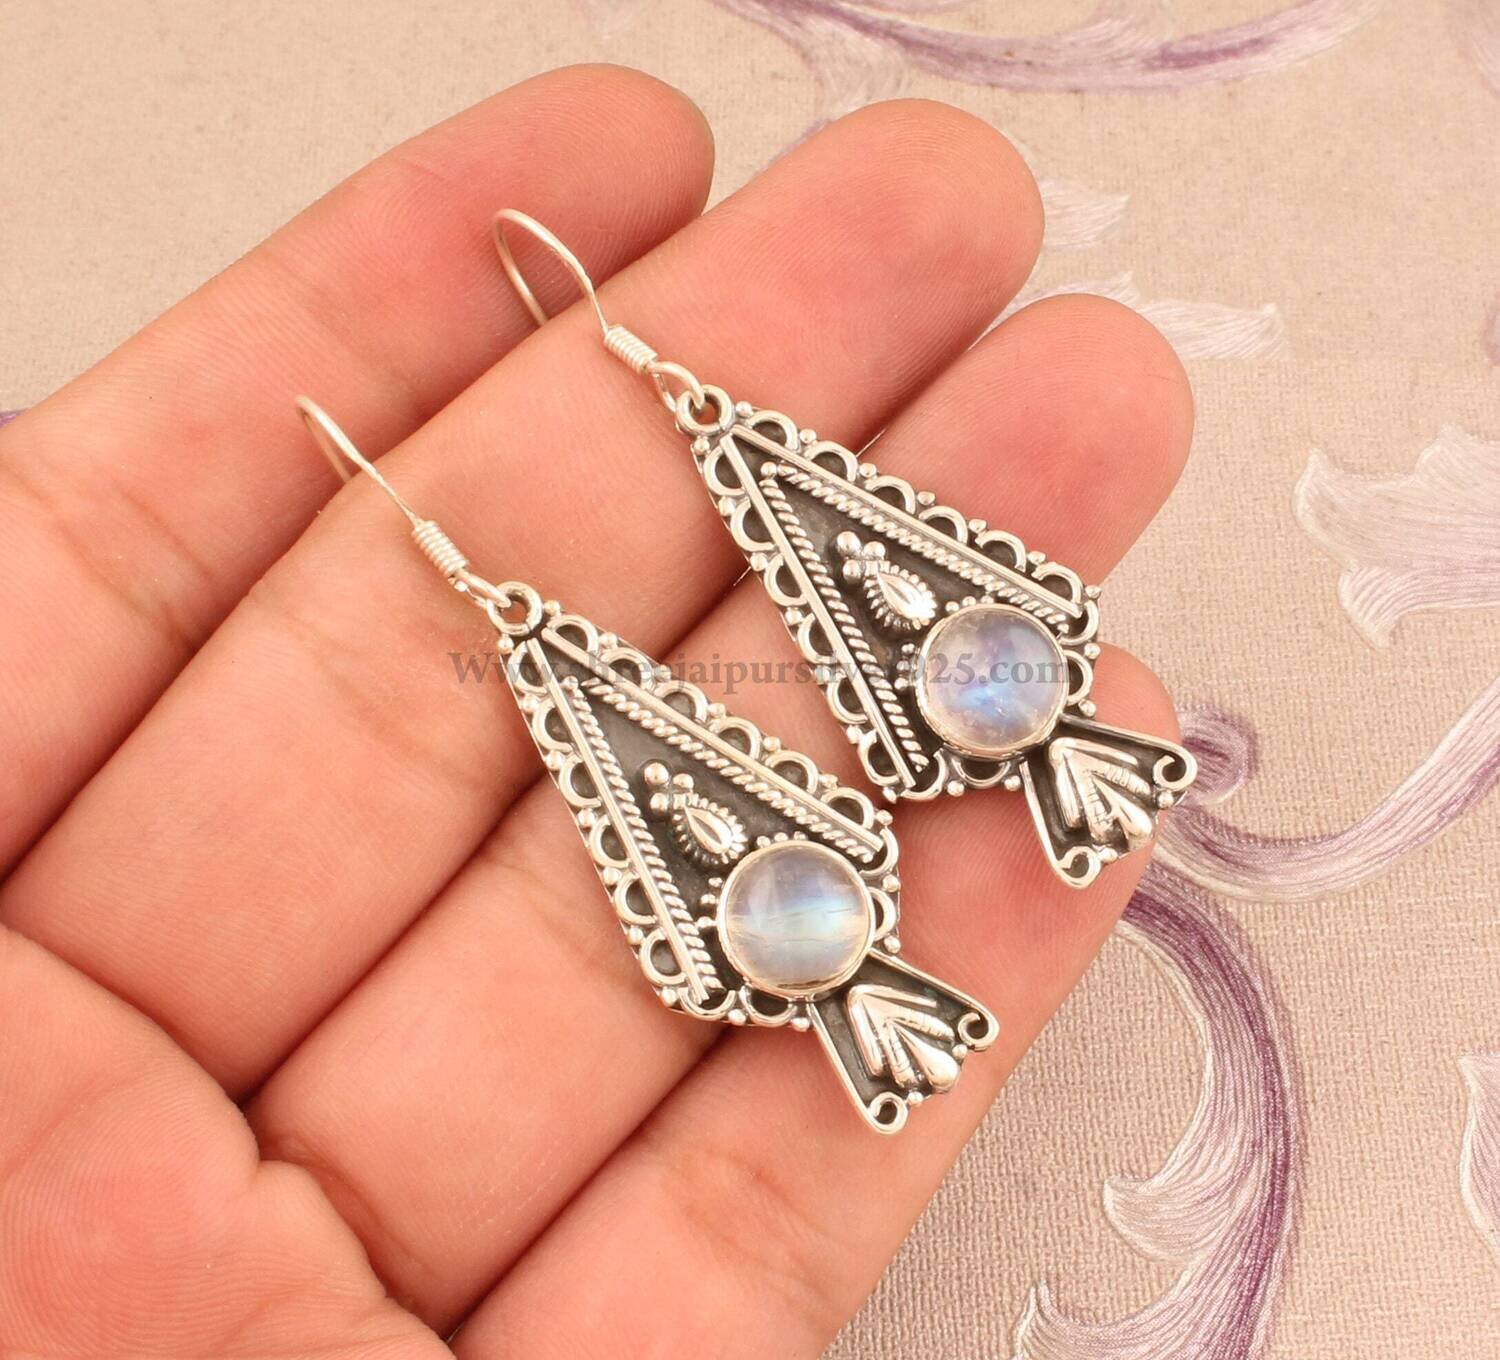 Natural Rainbow Moonstone Solid 925 Sterling Silver Earrings For Women Handmade Round Stone IndianEarrings For Wedding Anniversary Gift Idea